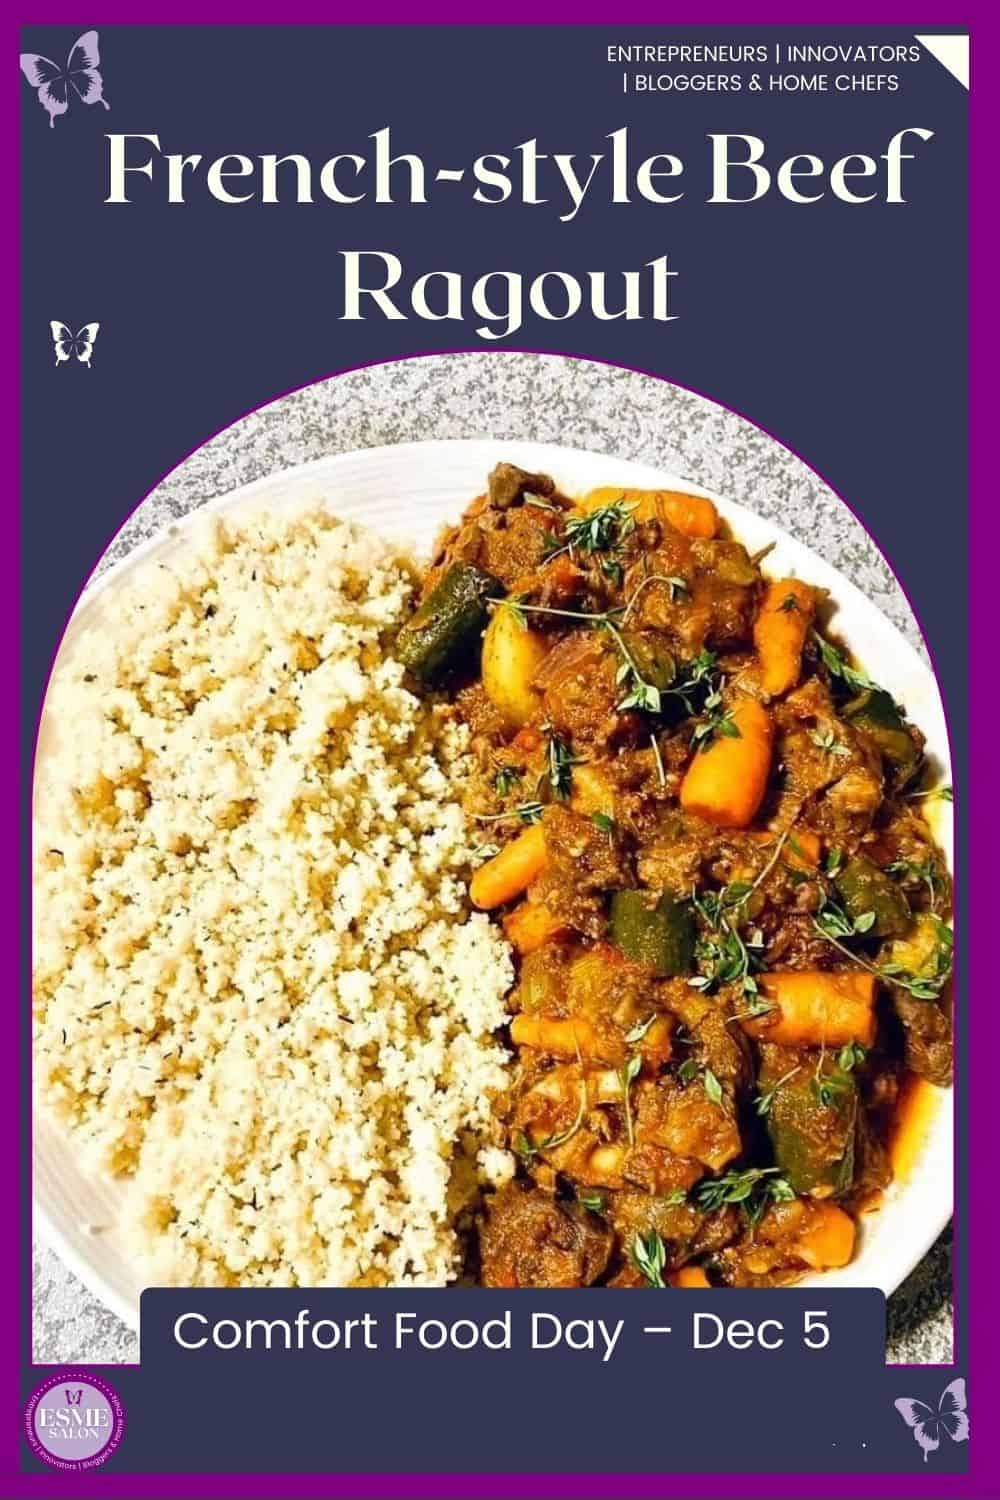 an image ofFrench-style Beef Ragout served with herbed Couscous